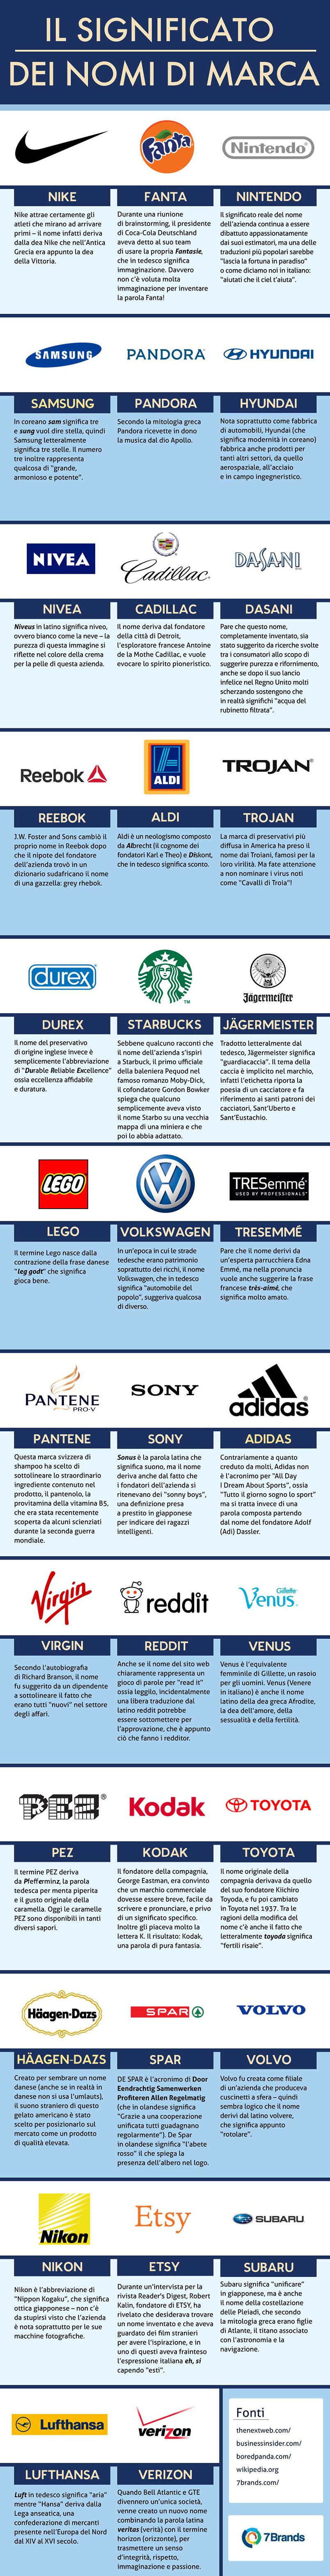 meaning of brand names_IT